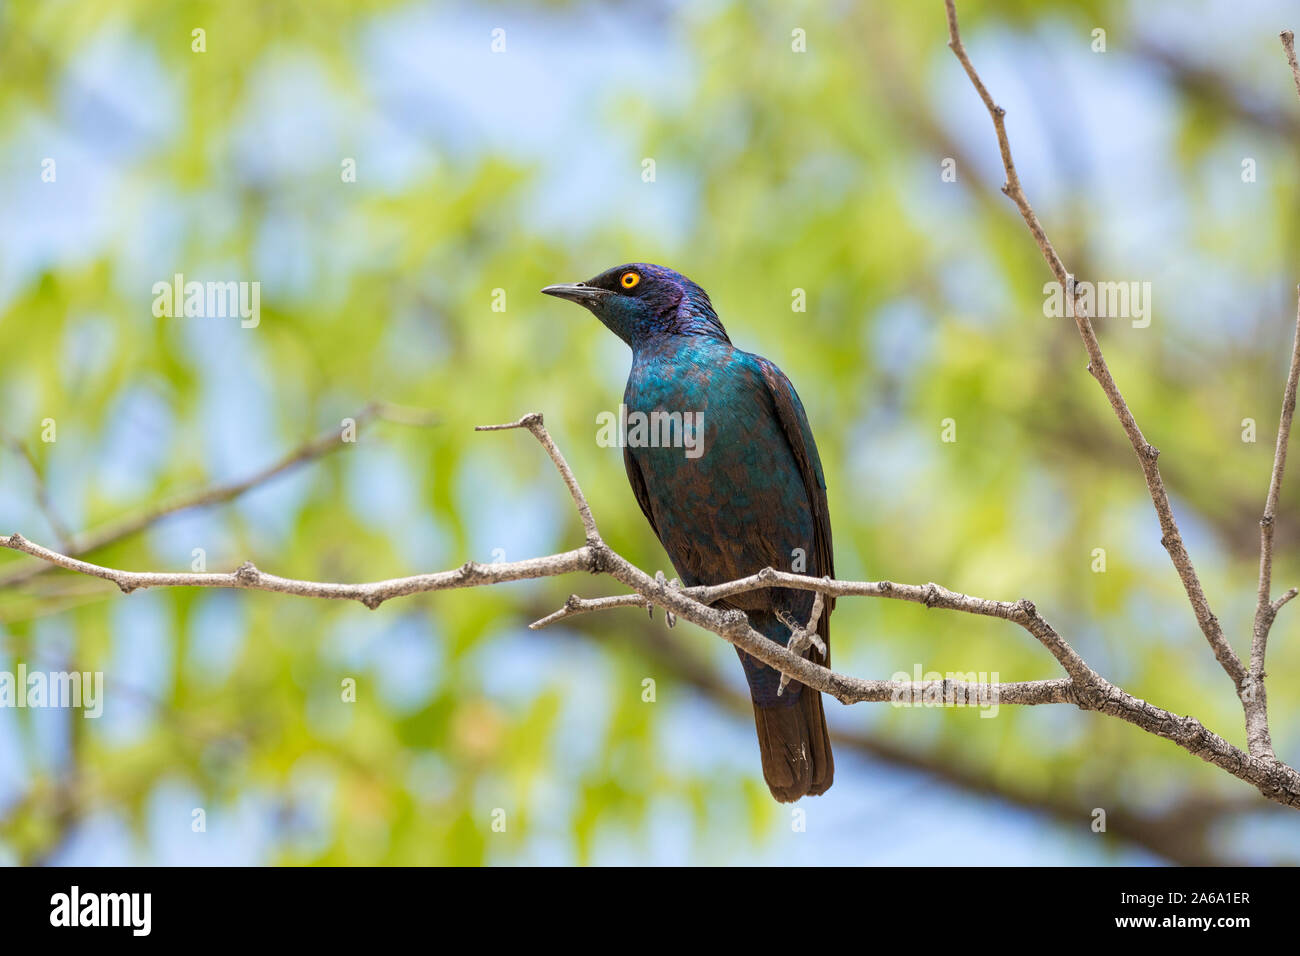 Red-shouldered glossy-starling (Lamprotornis nitens) assis sur une branche, Namibie, Afrique Banque D'Images